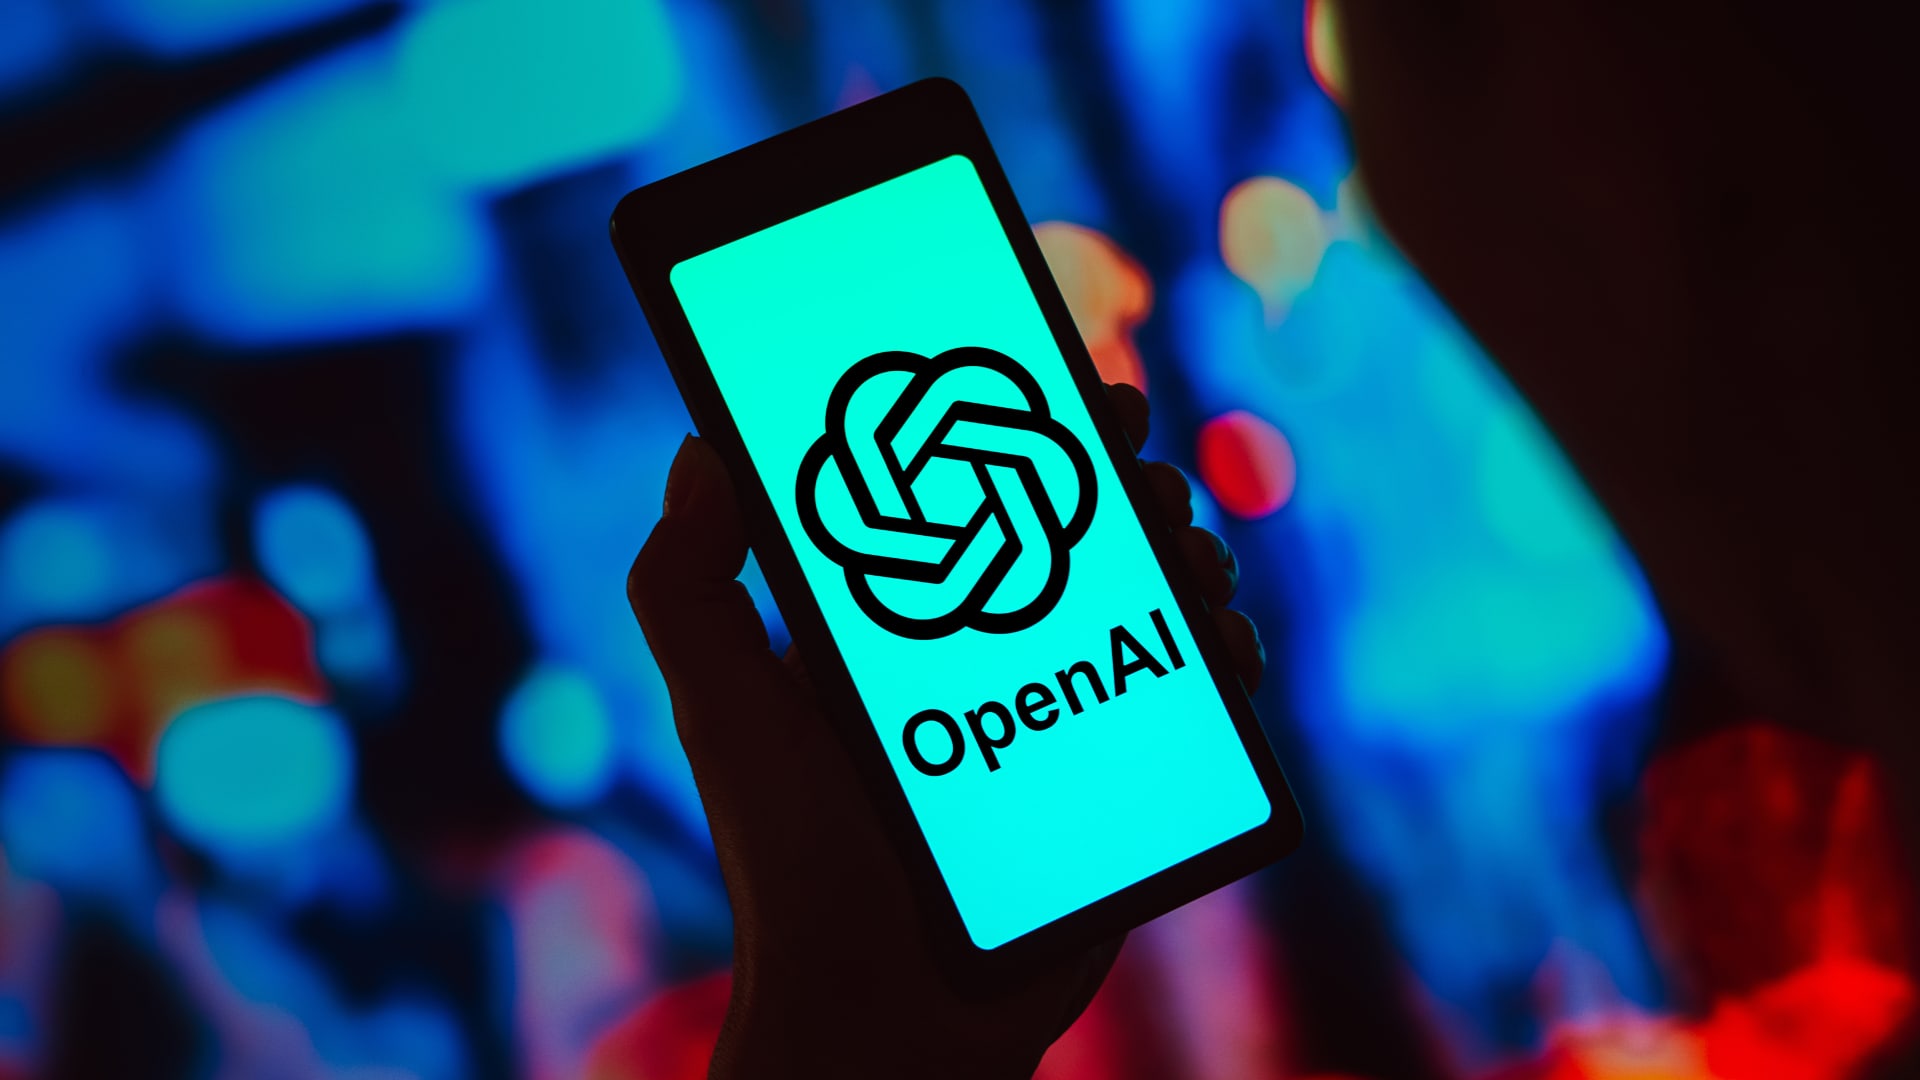 OpenAI opens its first Asia office in Japan as a ‘first step’ in its commitment to the region